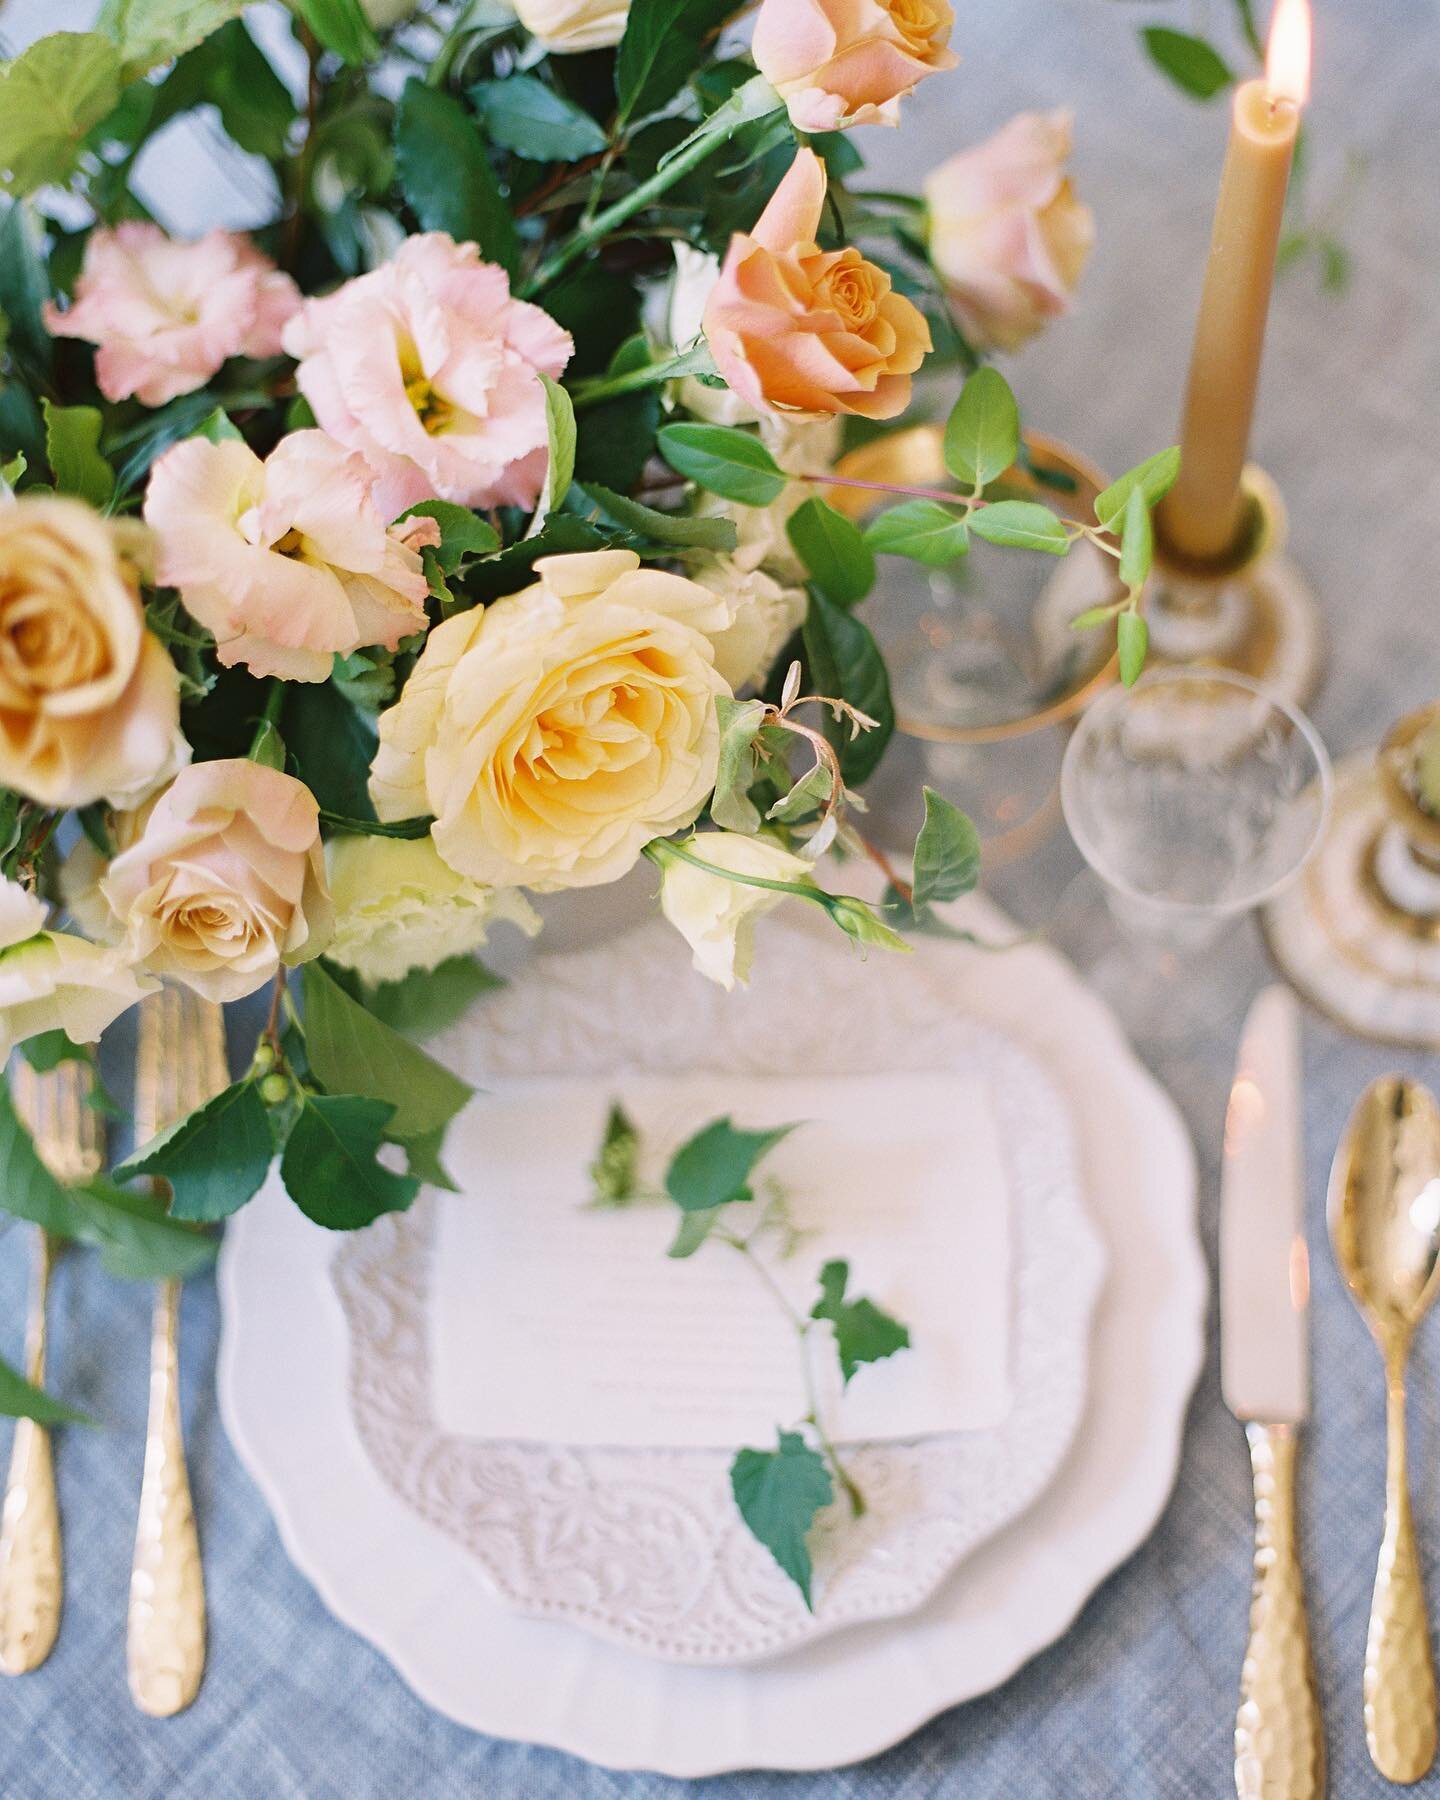 One way to make your wedding stand out from the rest is to add unique touches to your dinner table like this delicate fresh grape branch to garnish the plate. This garden-inspired centerpiece with vintage blue linens and china created the prettiest t